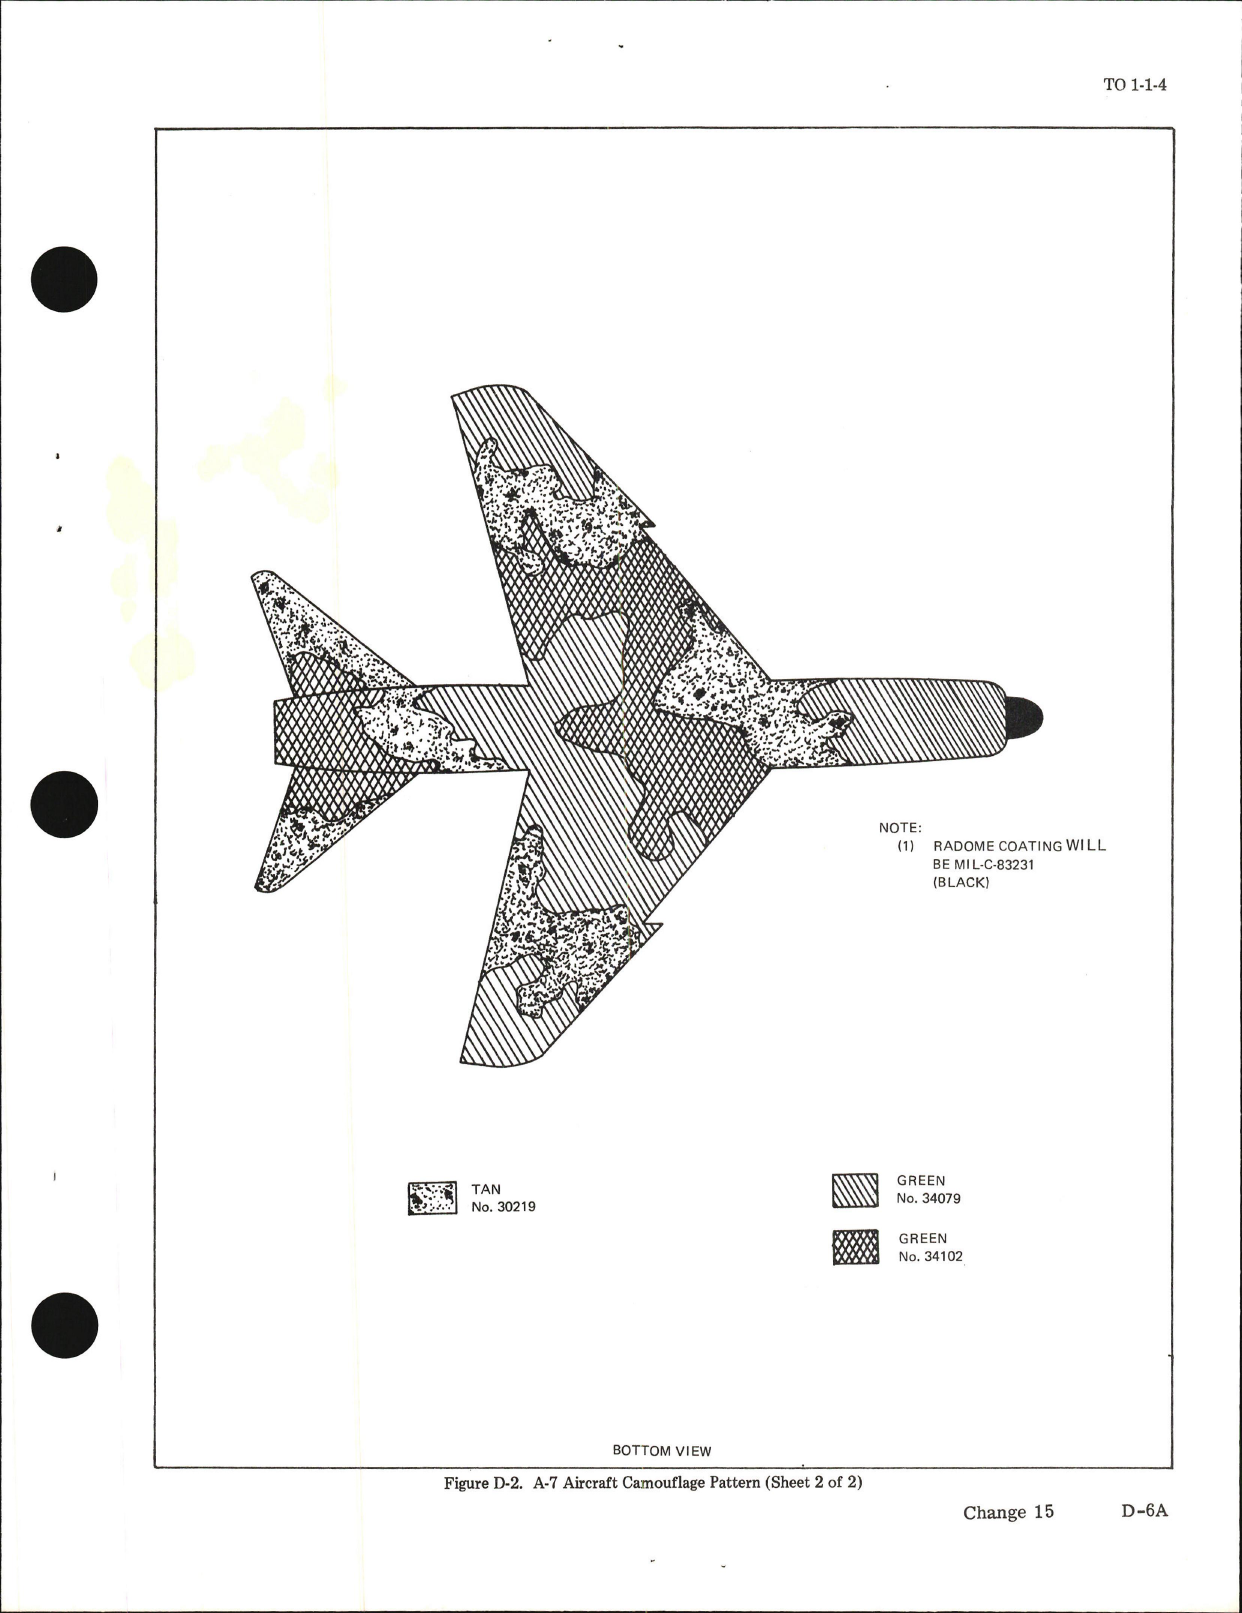 Sample page 13 from AirCorps Library document: Exterior Finishes, Insignia and Markings for USAF Aircraft - Change - 15